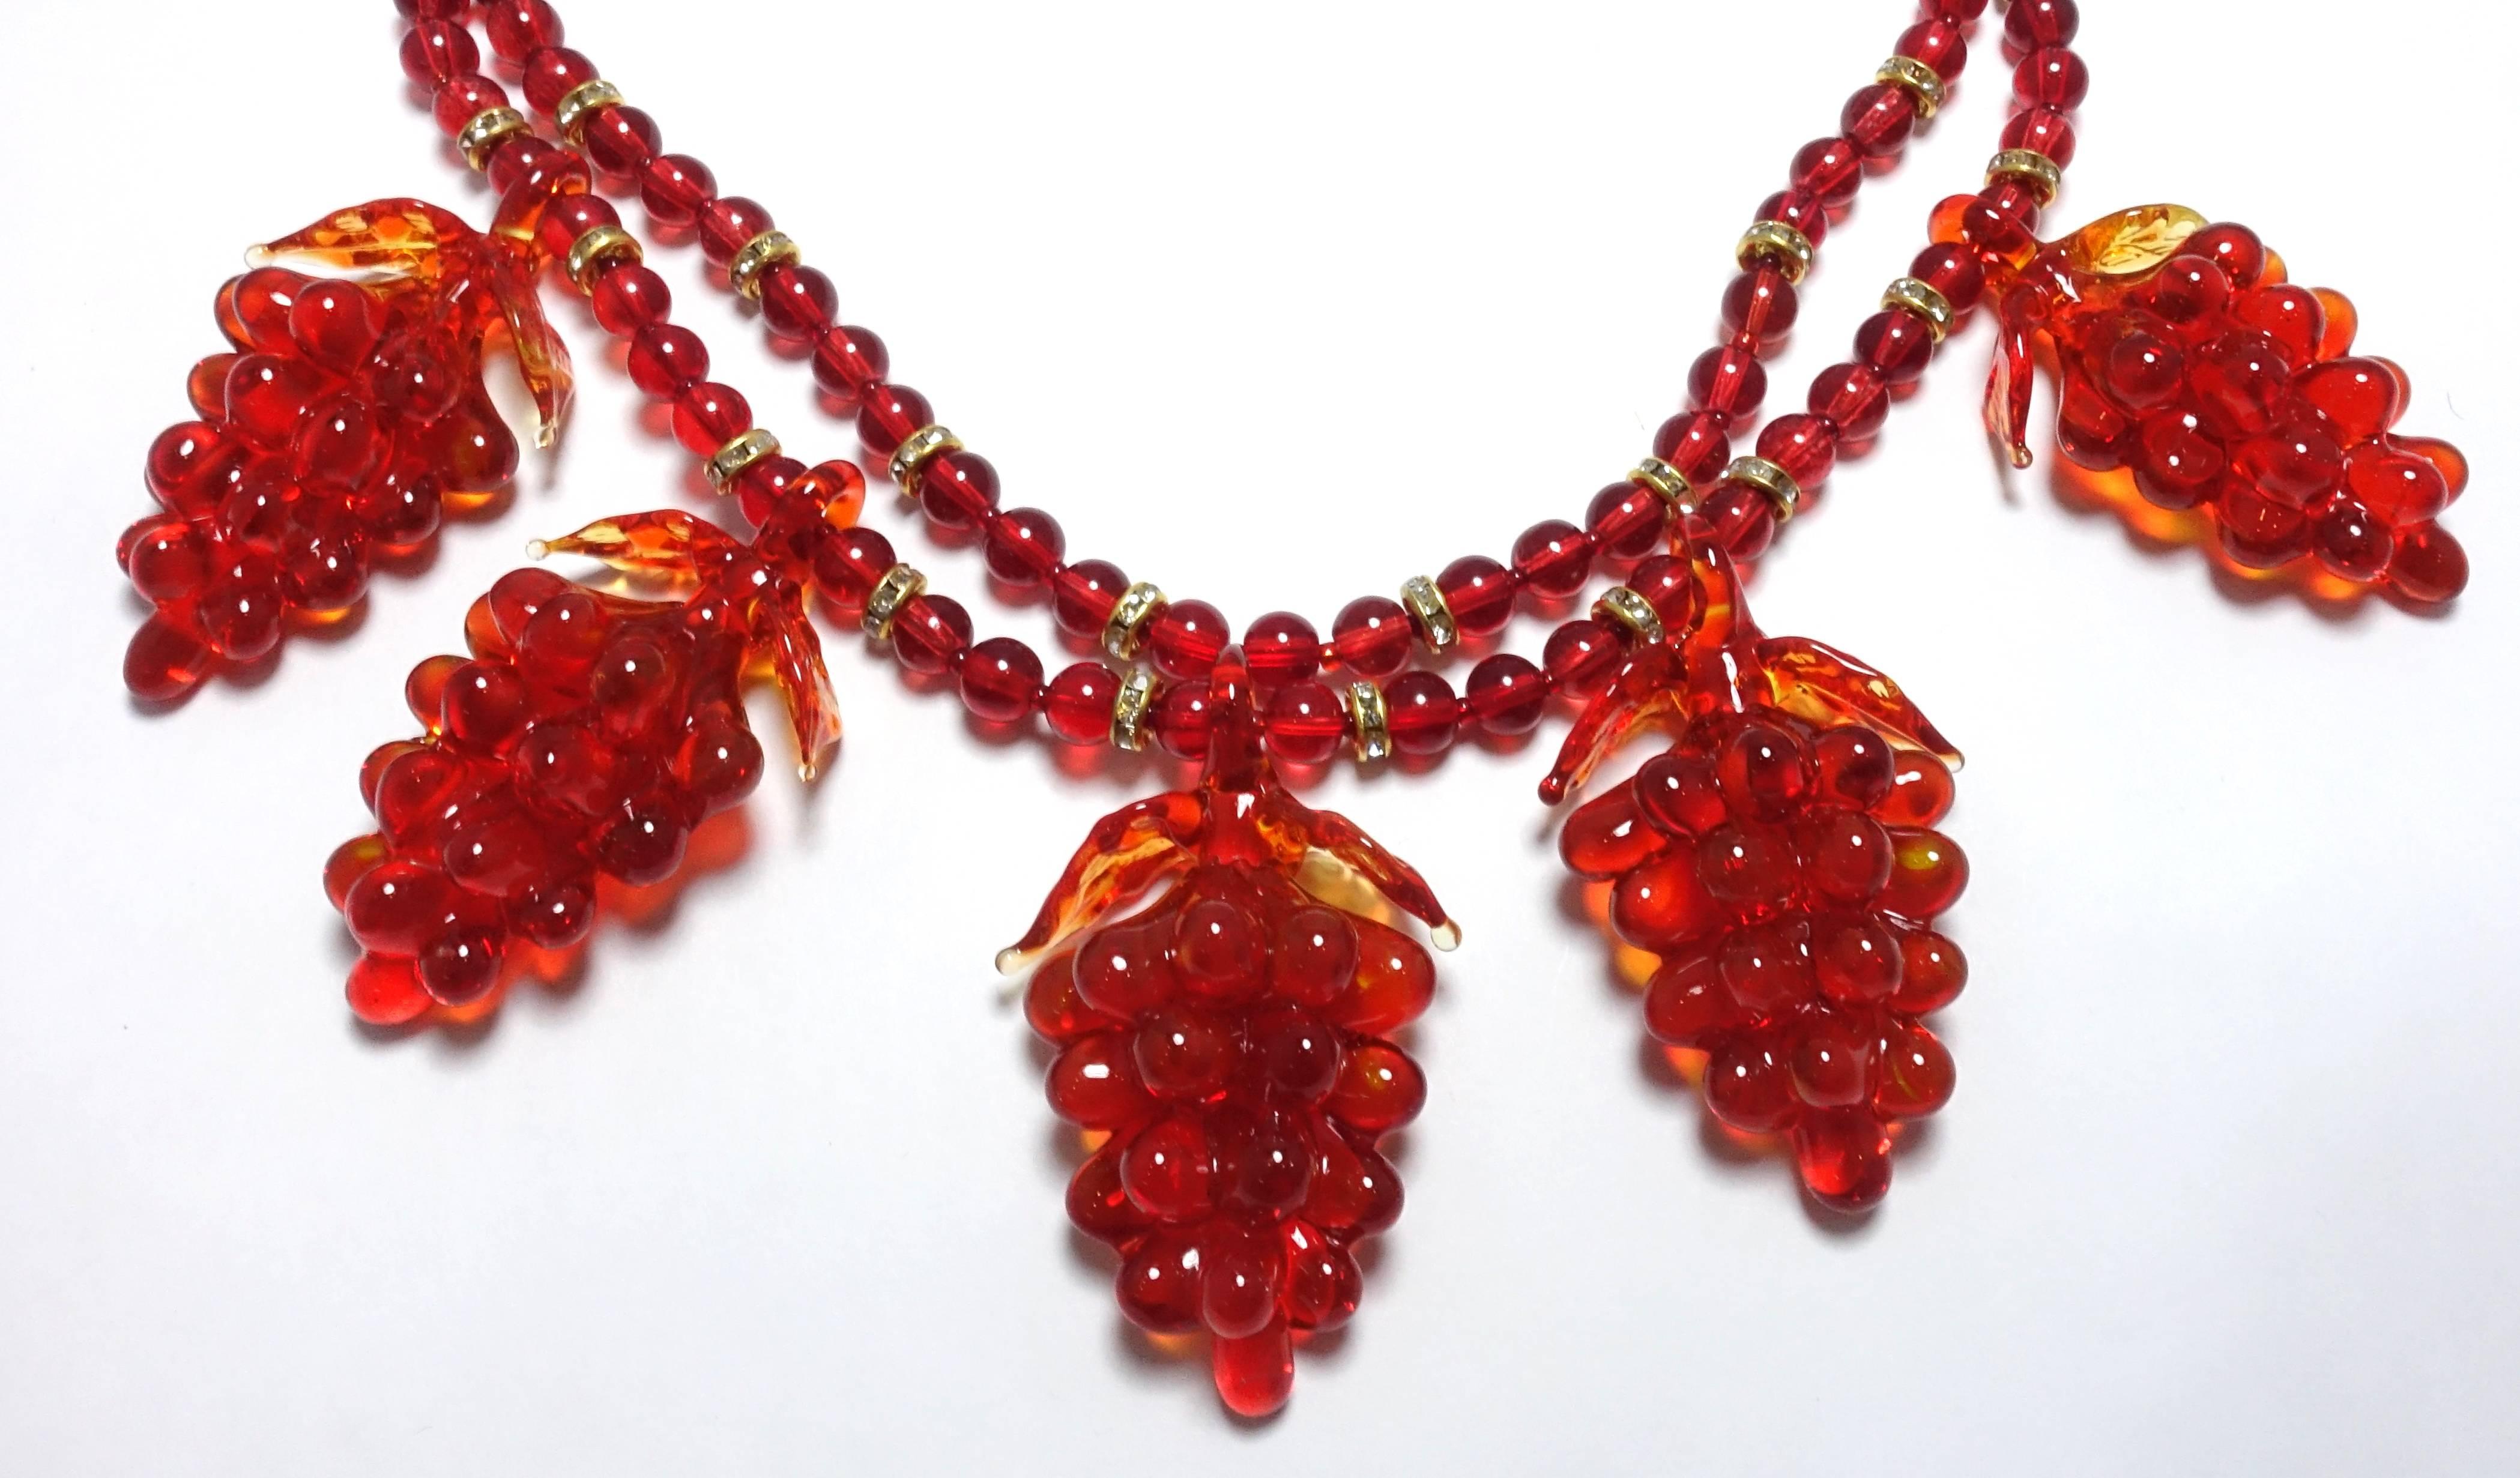 This necklace is amazing.  It is made with old red Czech glass from the 1930s.  There are two strands of red glass beads with Rondell dividers throughout the strands.  On the bottom strand, there are 5 glass grapes clusters hanging down.  It has an